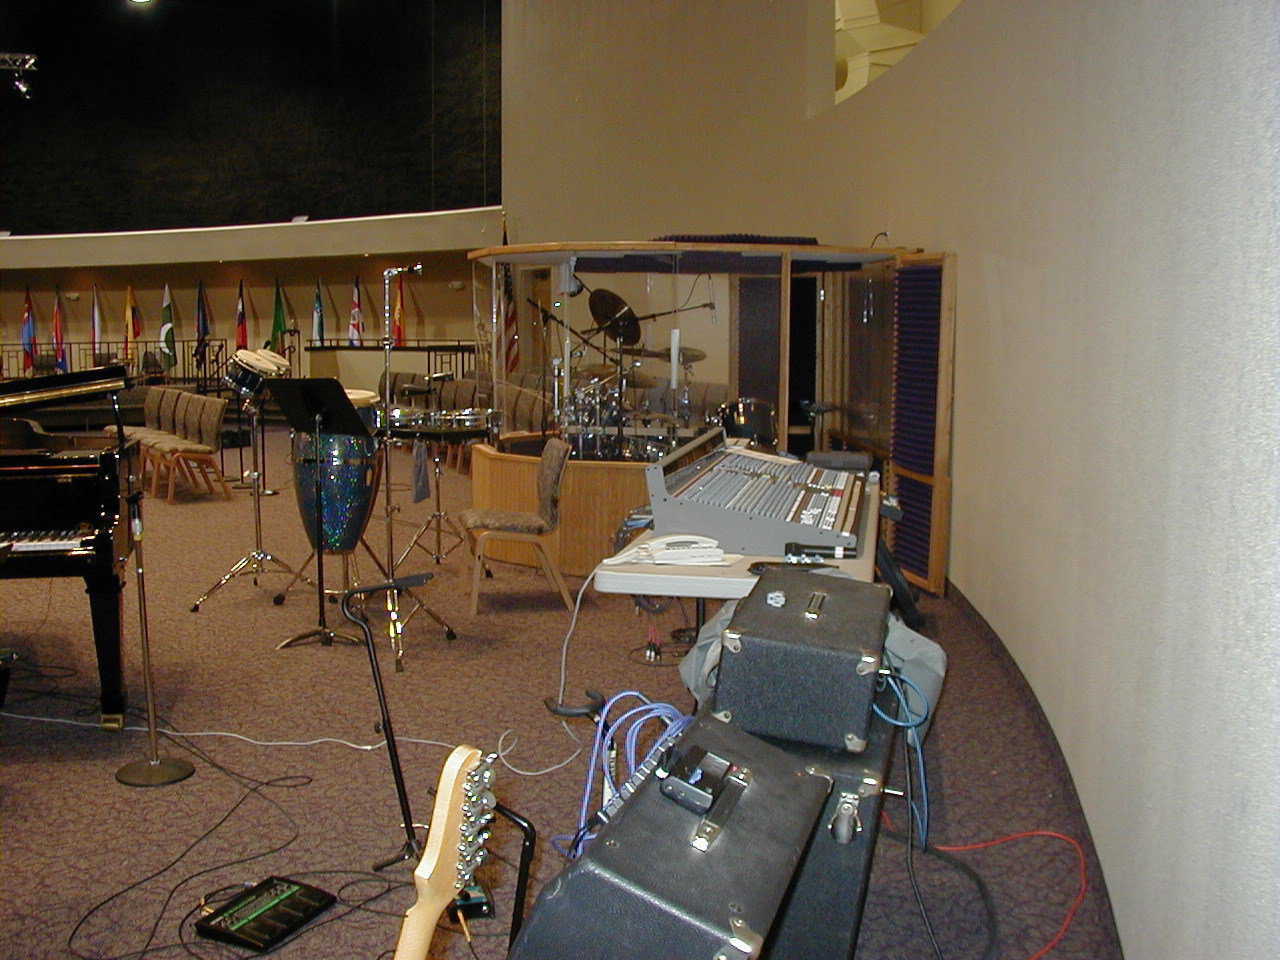 Pictured here is a sound stage set up for an audience, but a similar setup would be perfect for a recording studio.